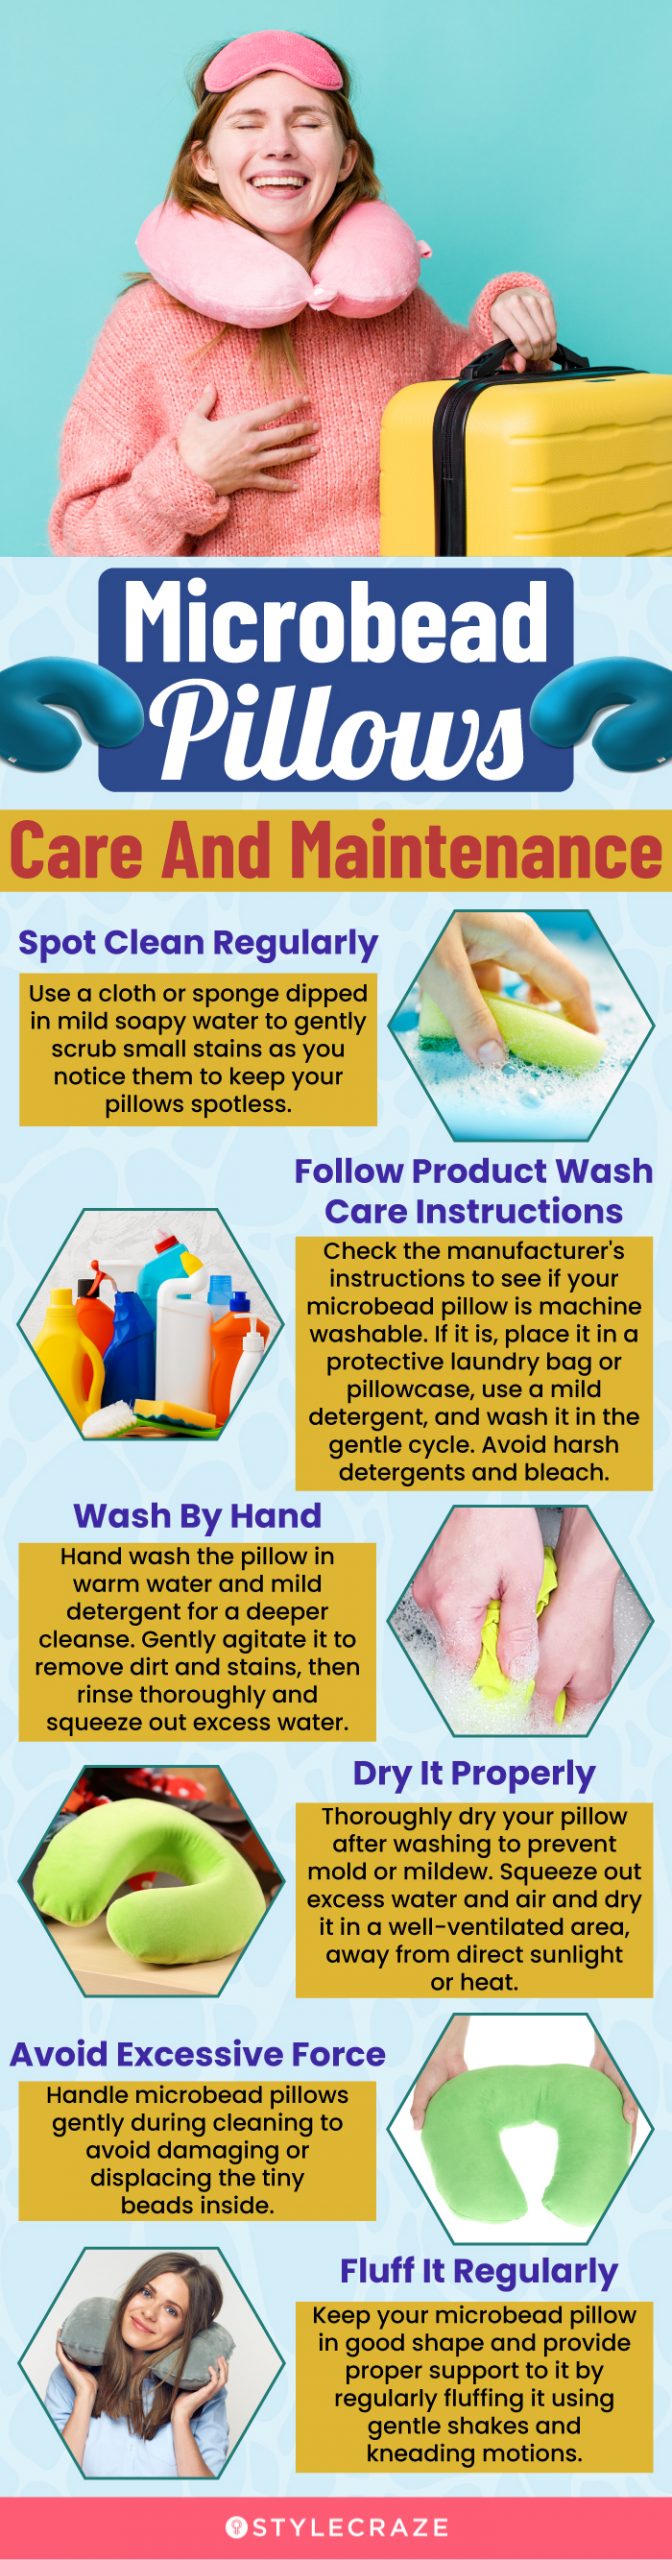 Microbead Pillows: Care And Maintenance (infographic)